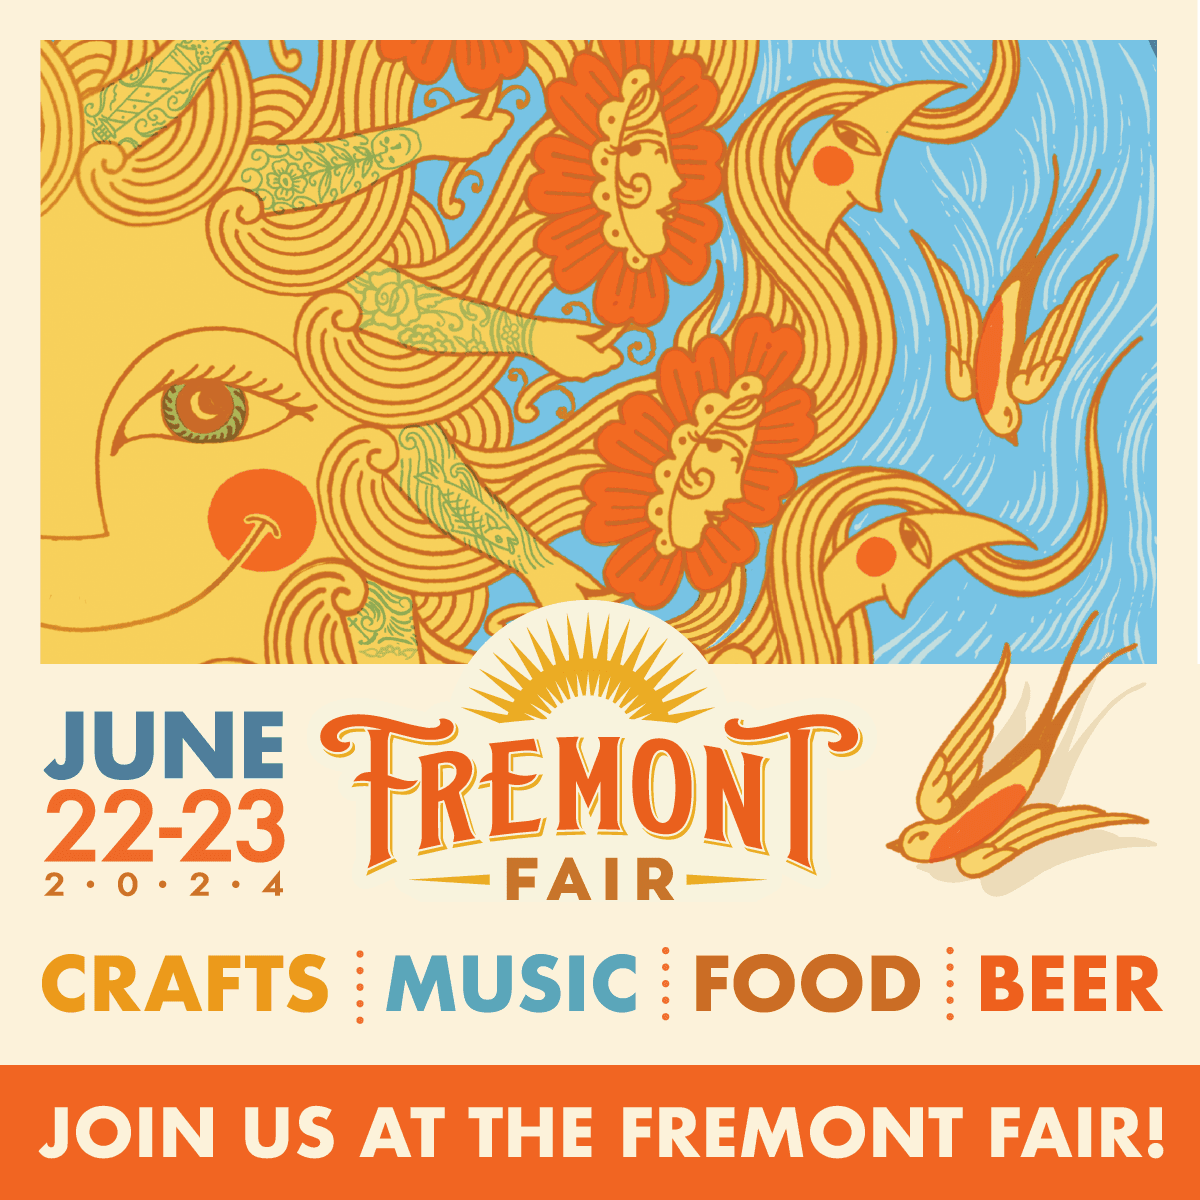 Seattle! Find us at the Fremont Fair June 22-23!